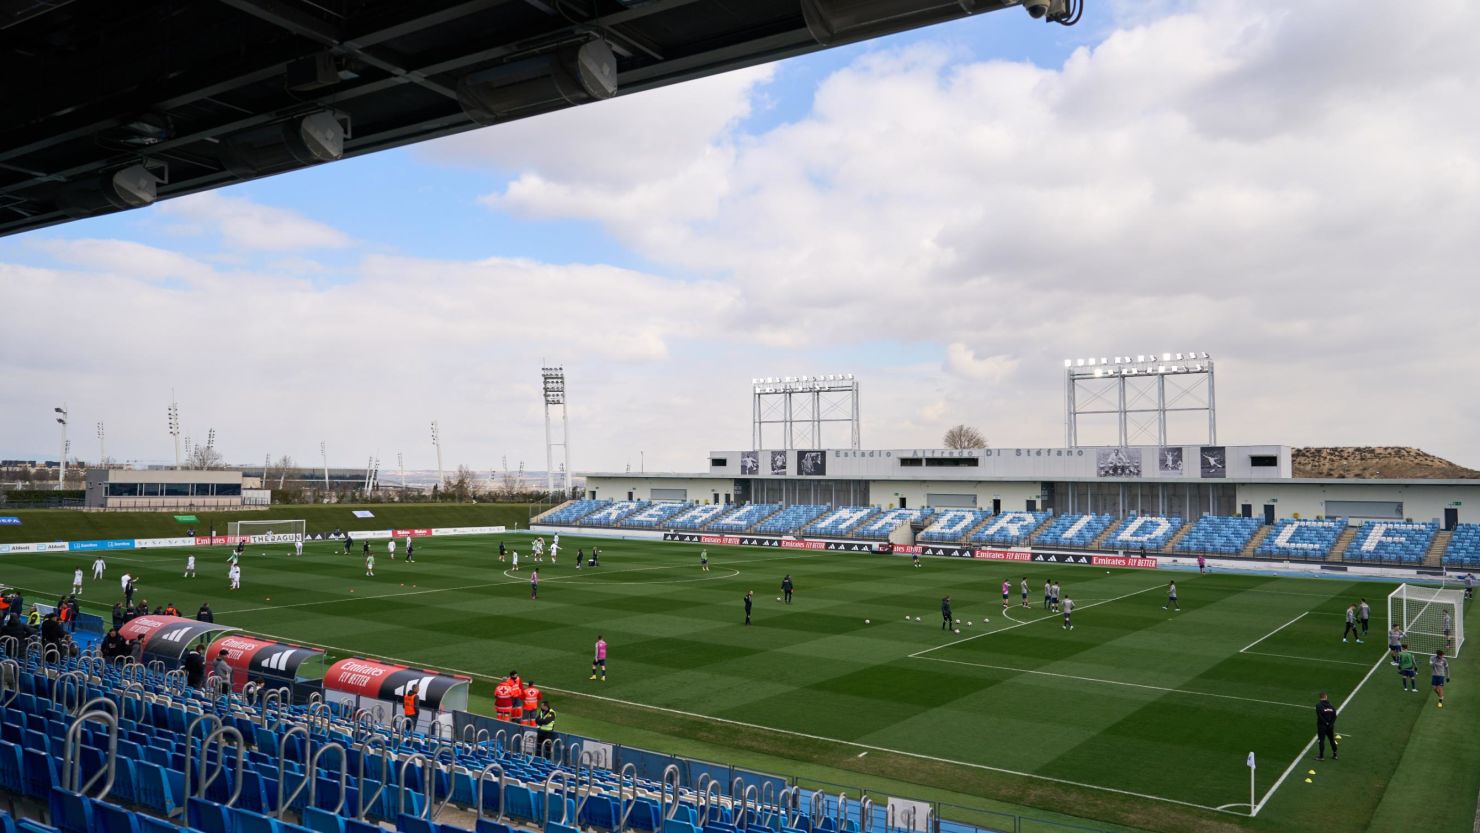 The Alfredo Di Stefano stadium, pictured on March 1, which is used by Real Madrid Castilla.